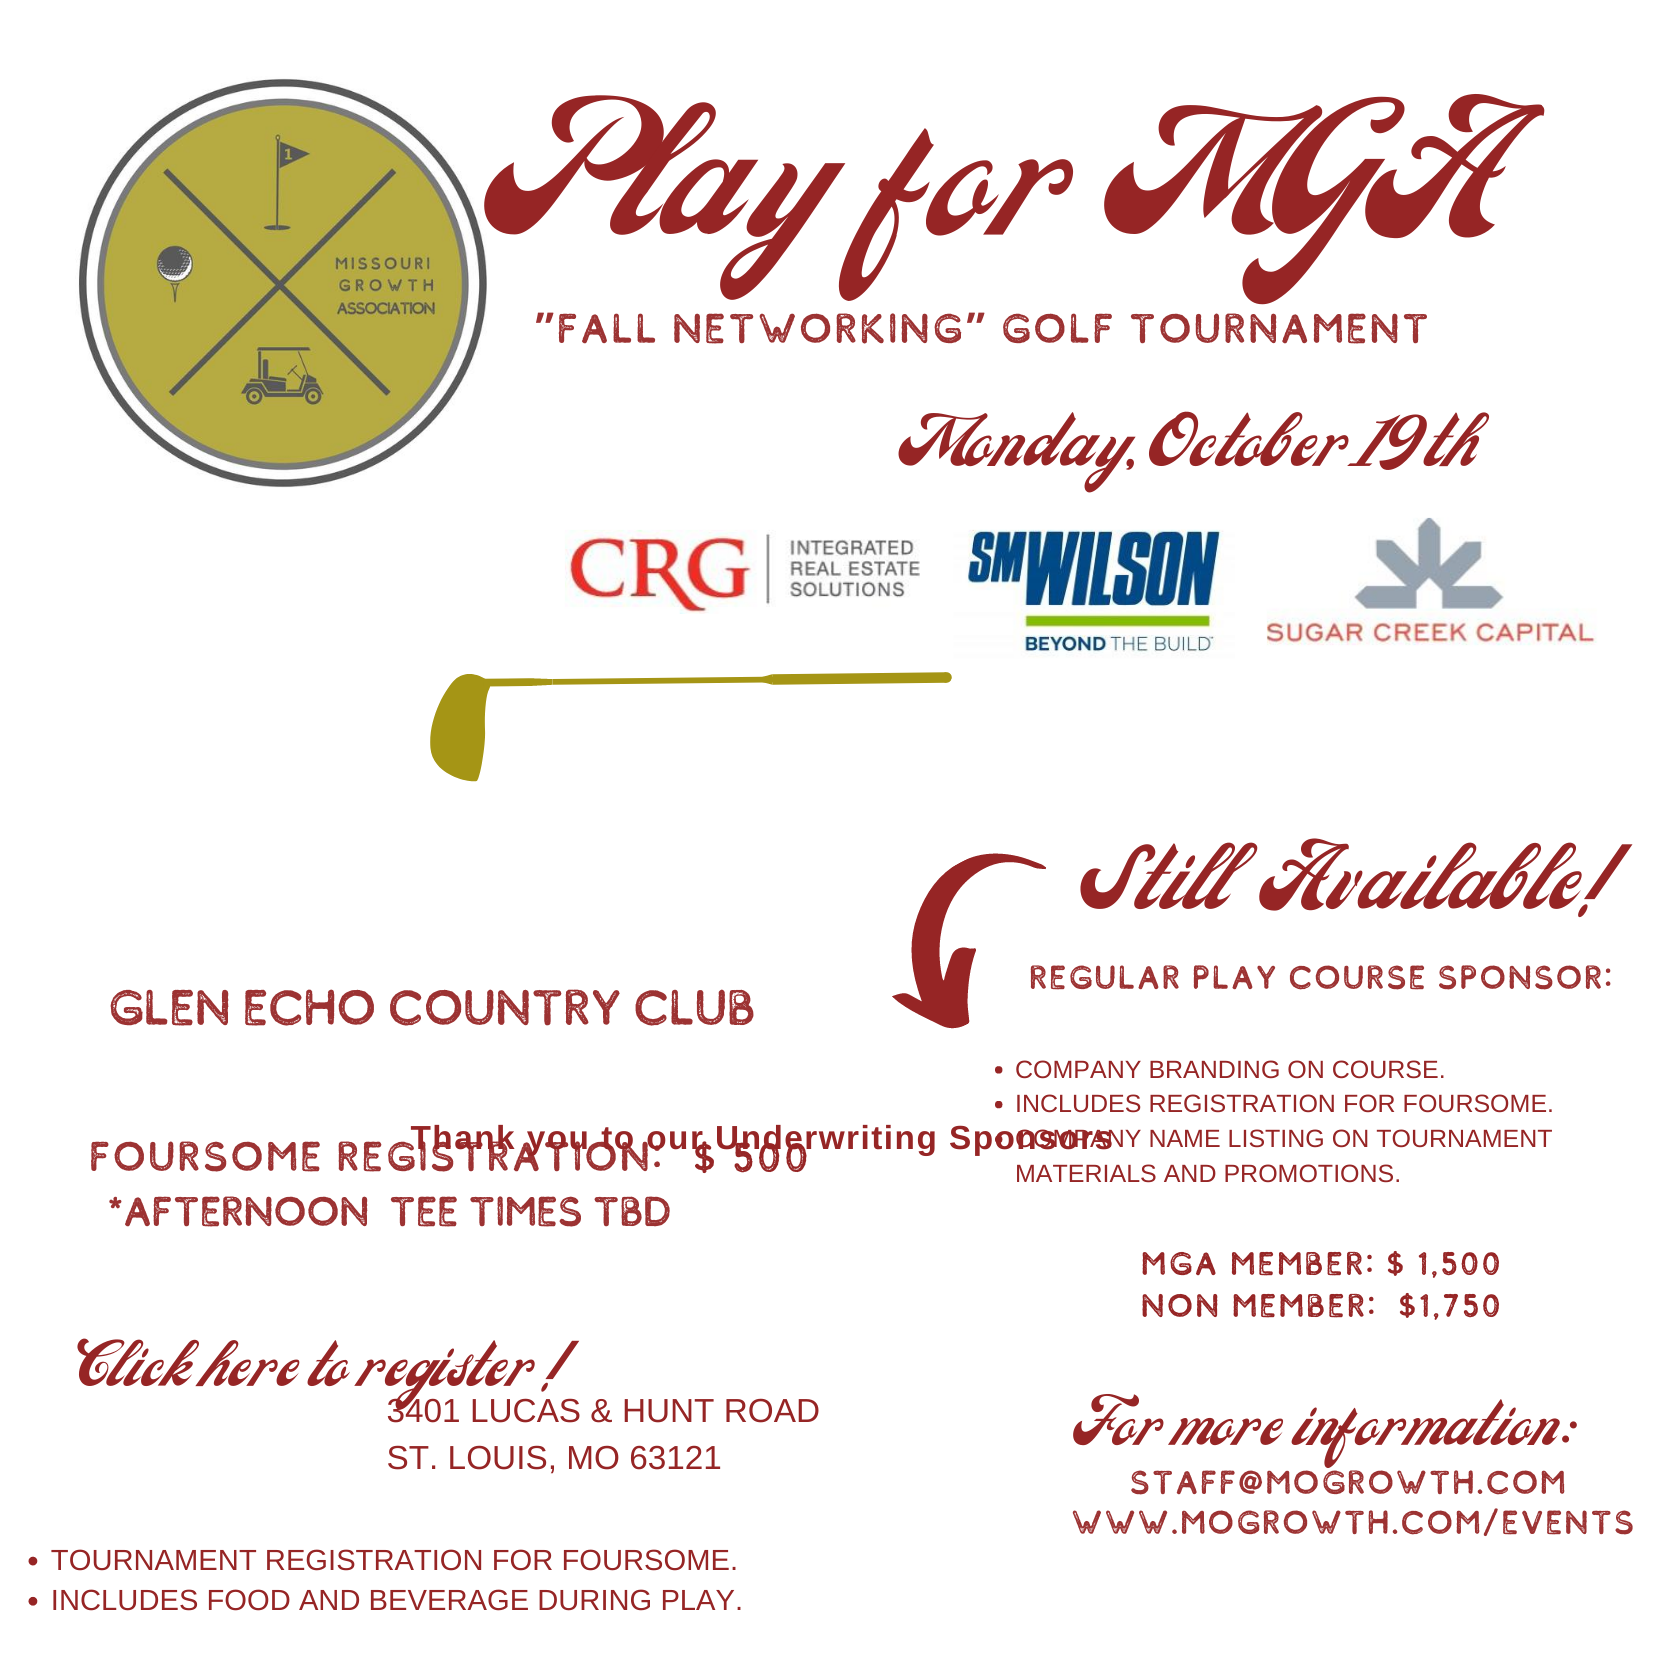 “Play for MGA” Golf Tournament Find Golf Tournaments